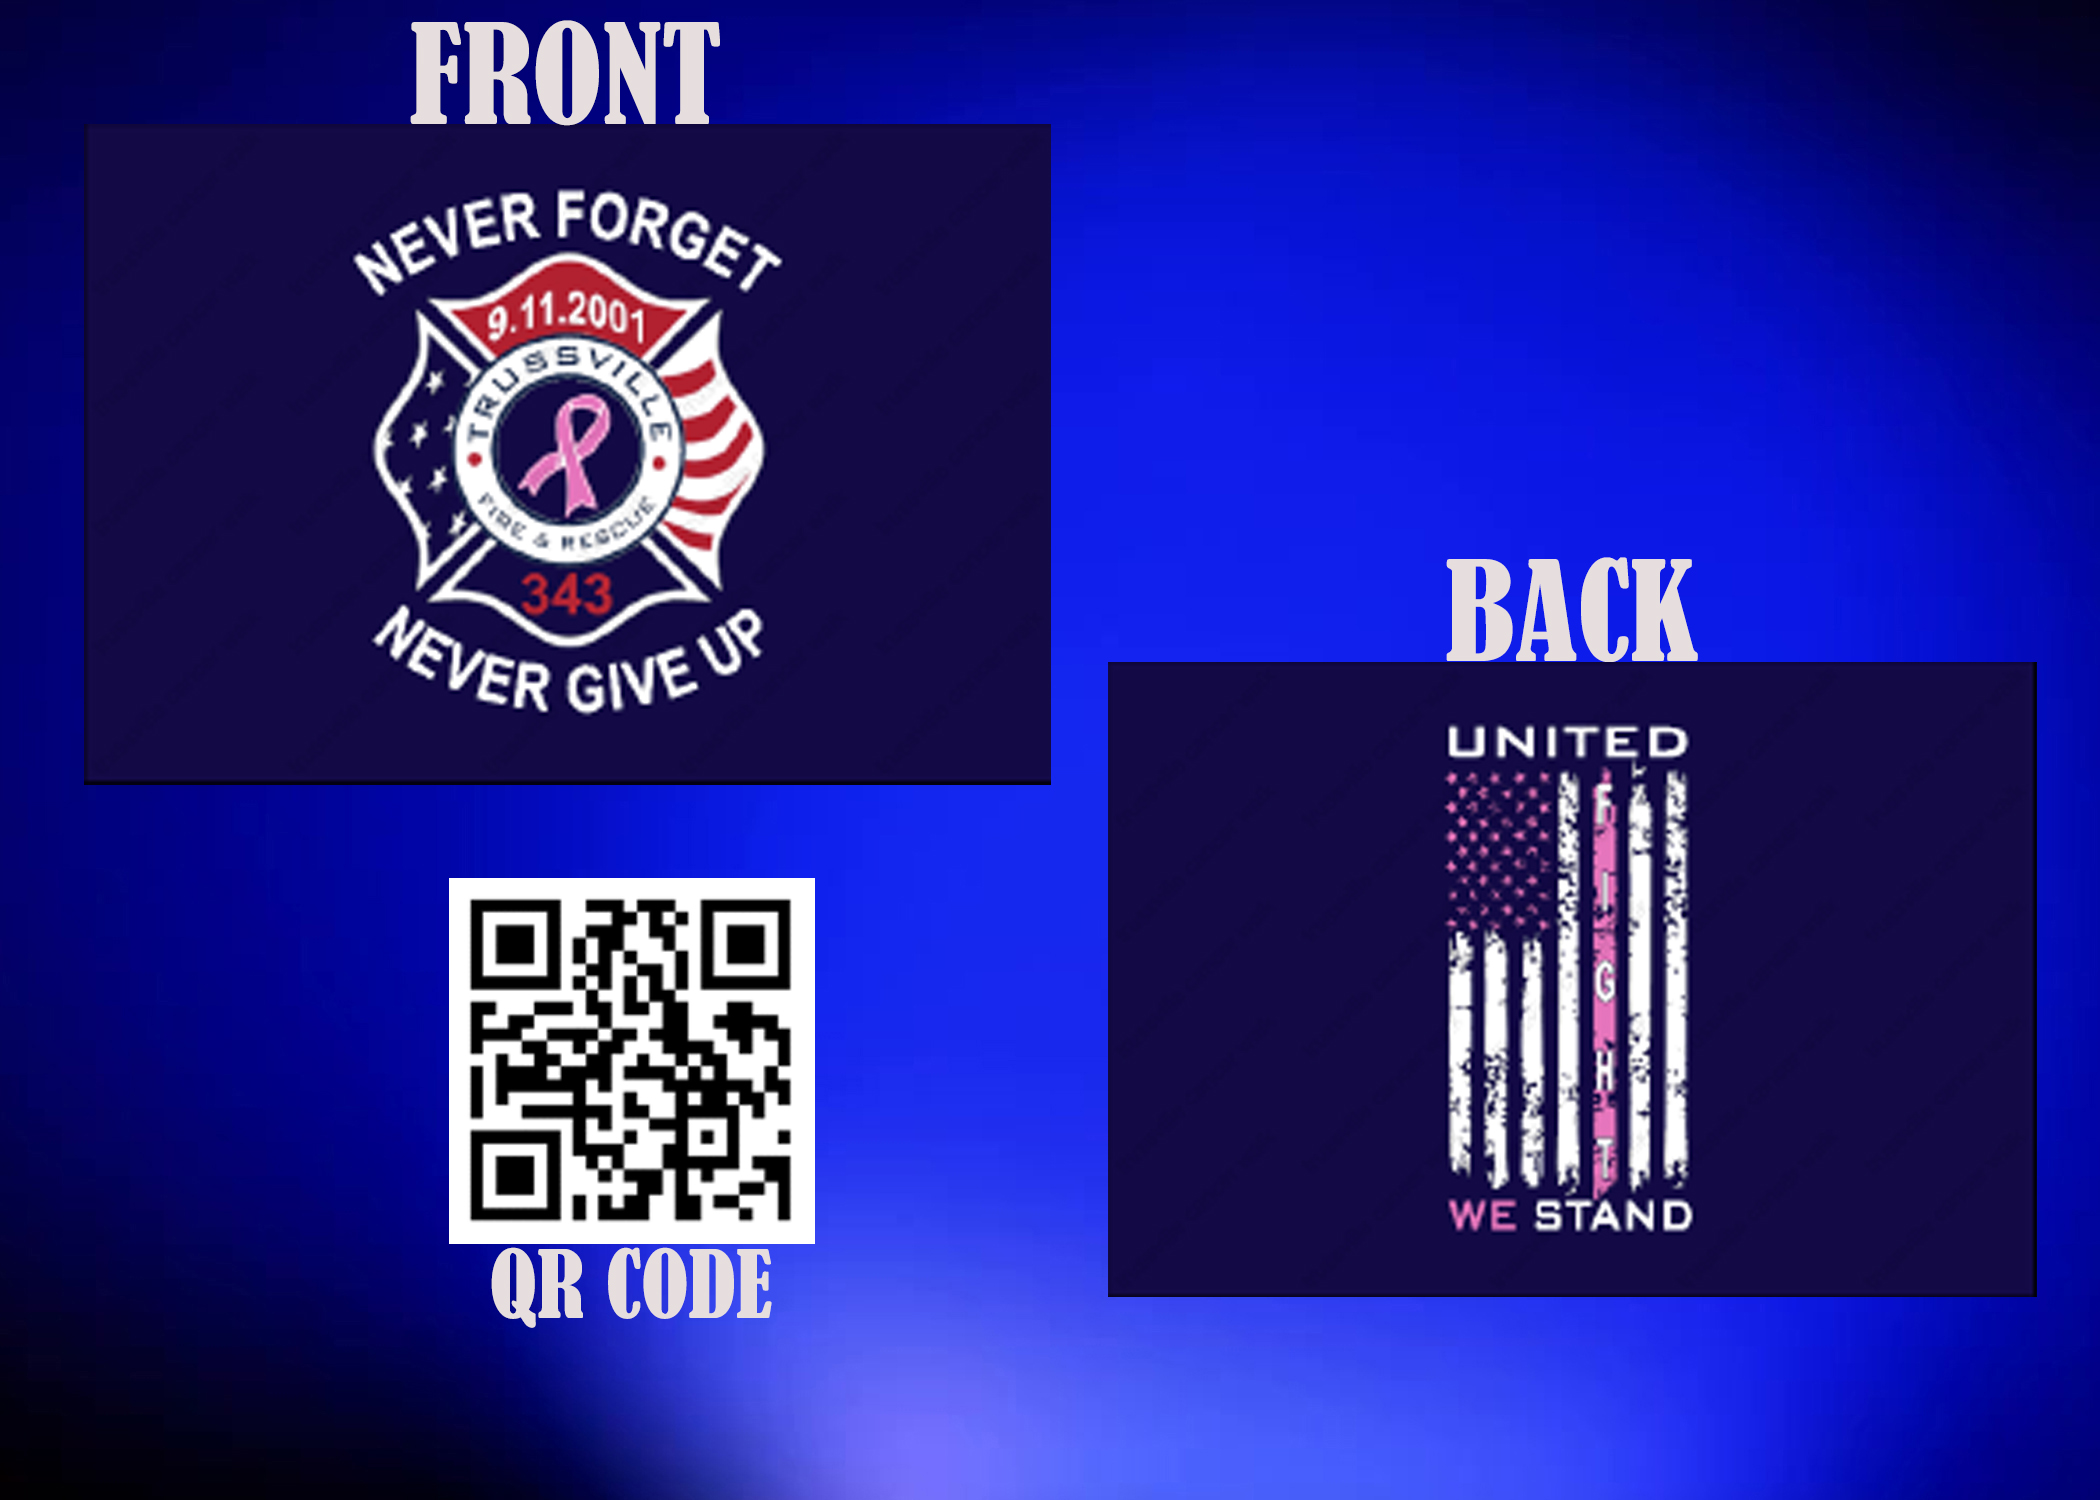 Trussville Fire selling T-shirts for breast cancer research and fallen firefighters